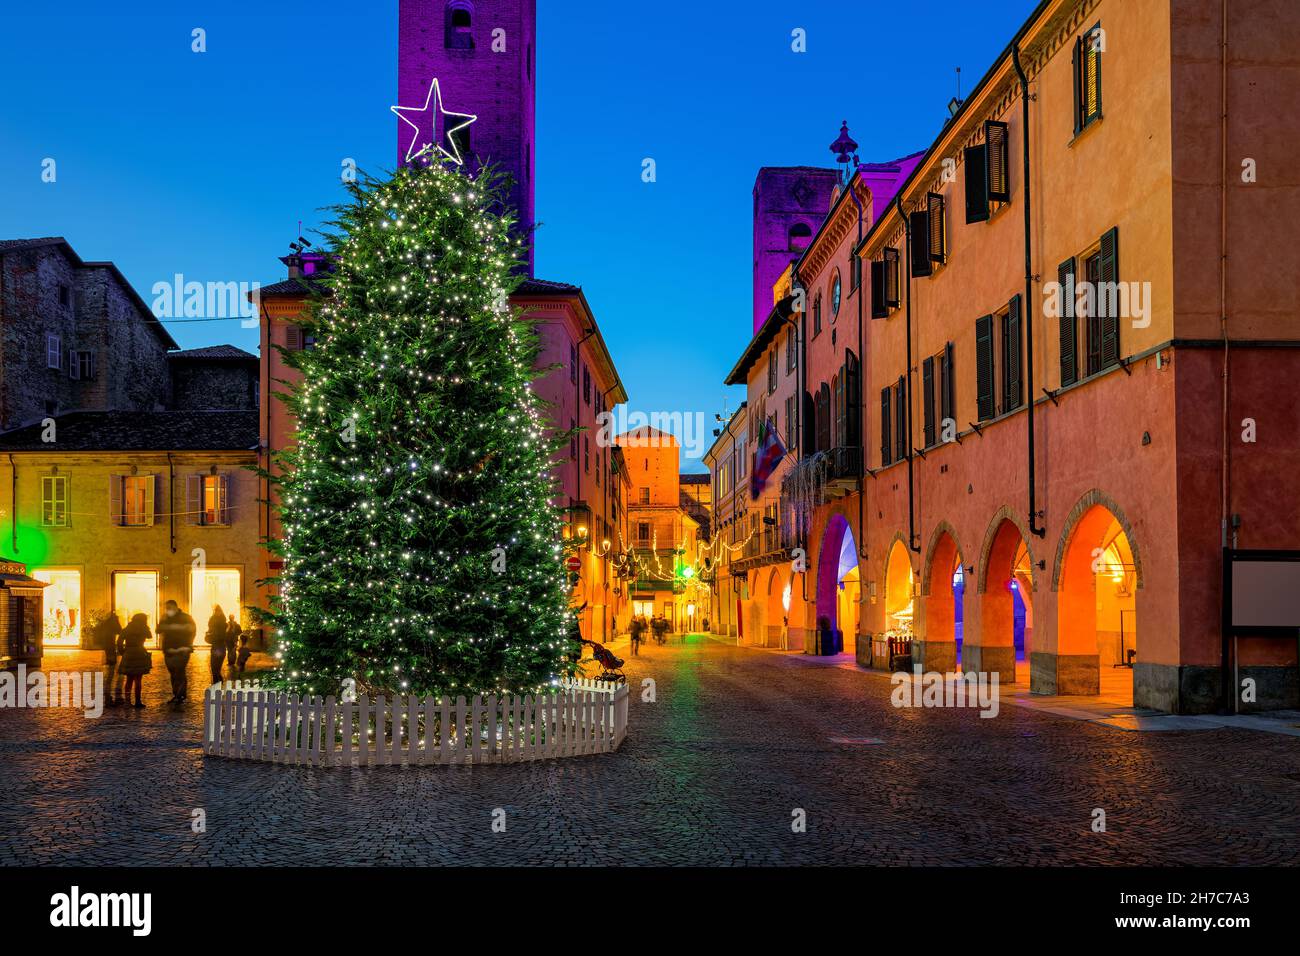 Illuminated Christmas tree on town square in the evening among historic houses in Alba, Piedmont, Northern Italy.. Stock Photo